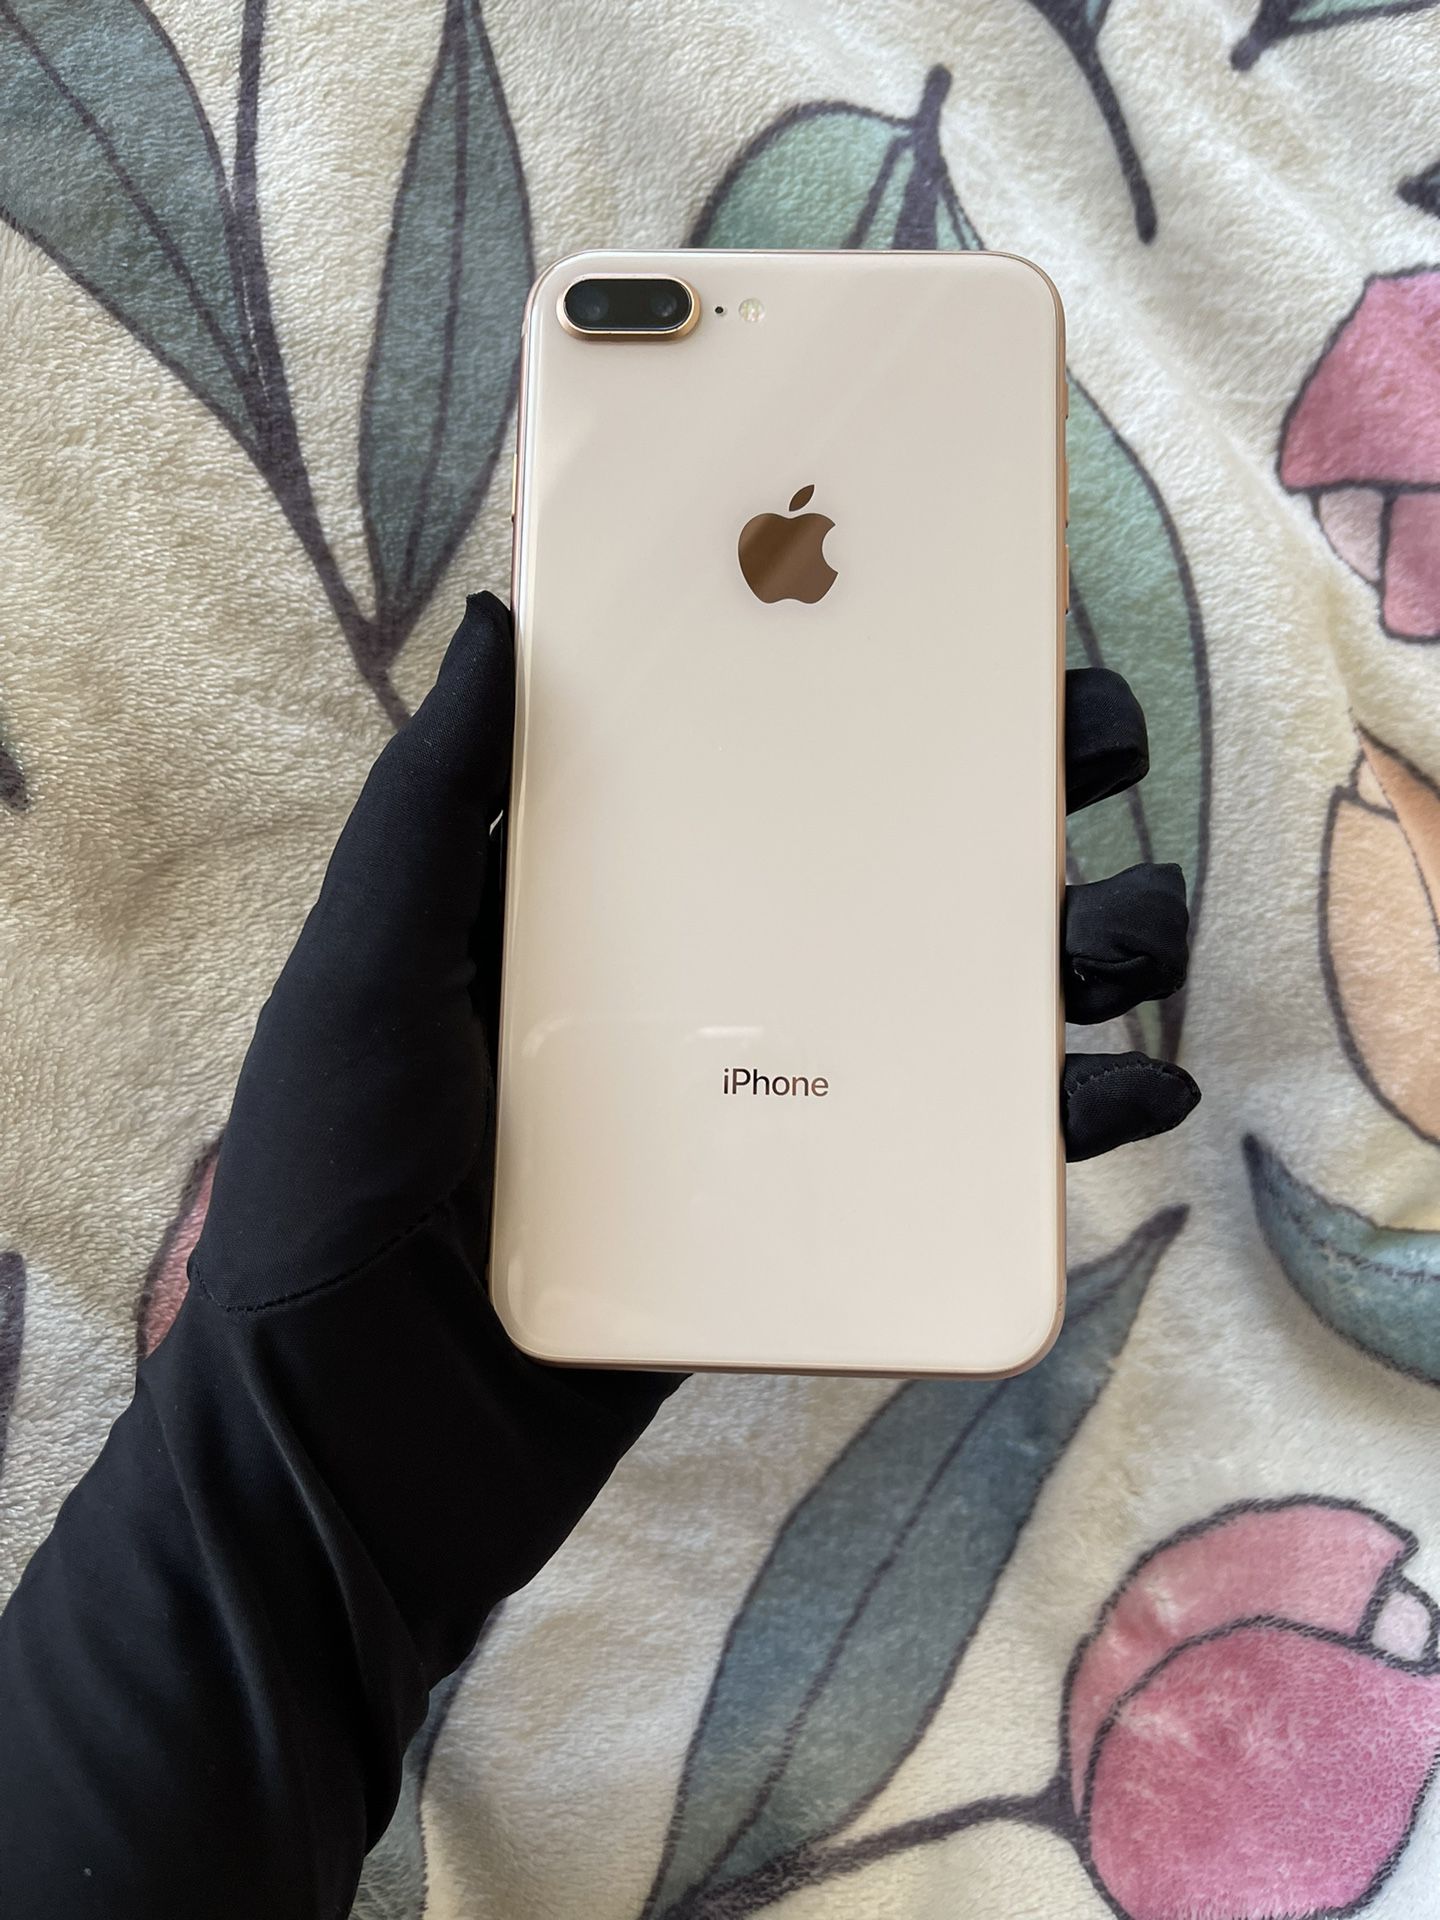 Apple iPhone 8 Plus 64 GB For T Mobile 